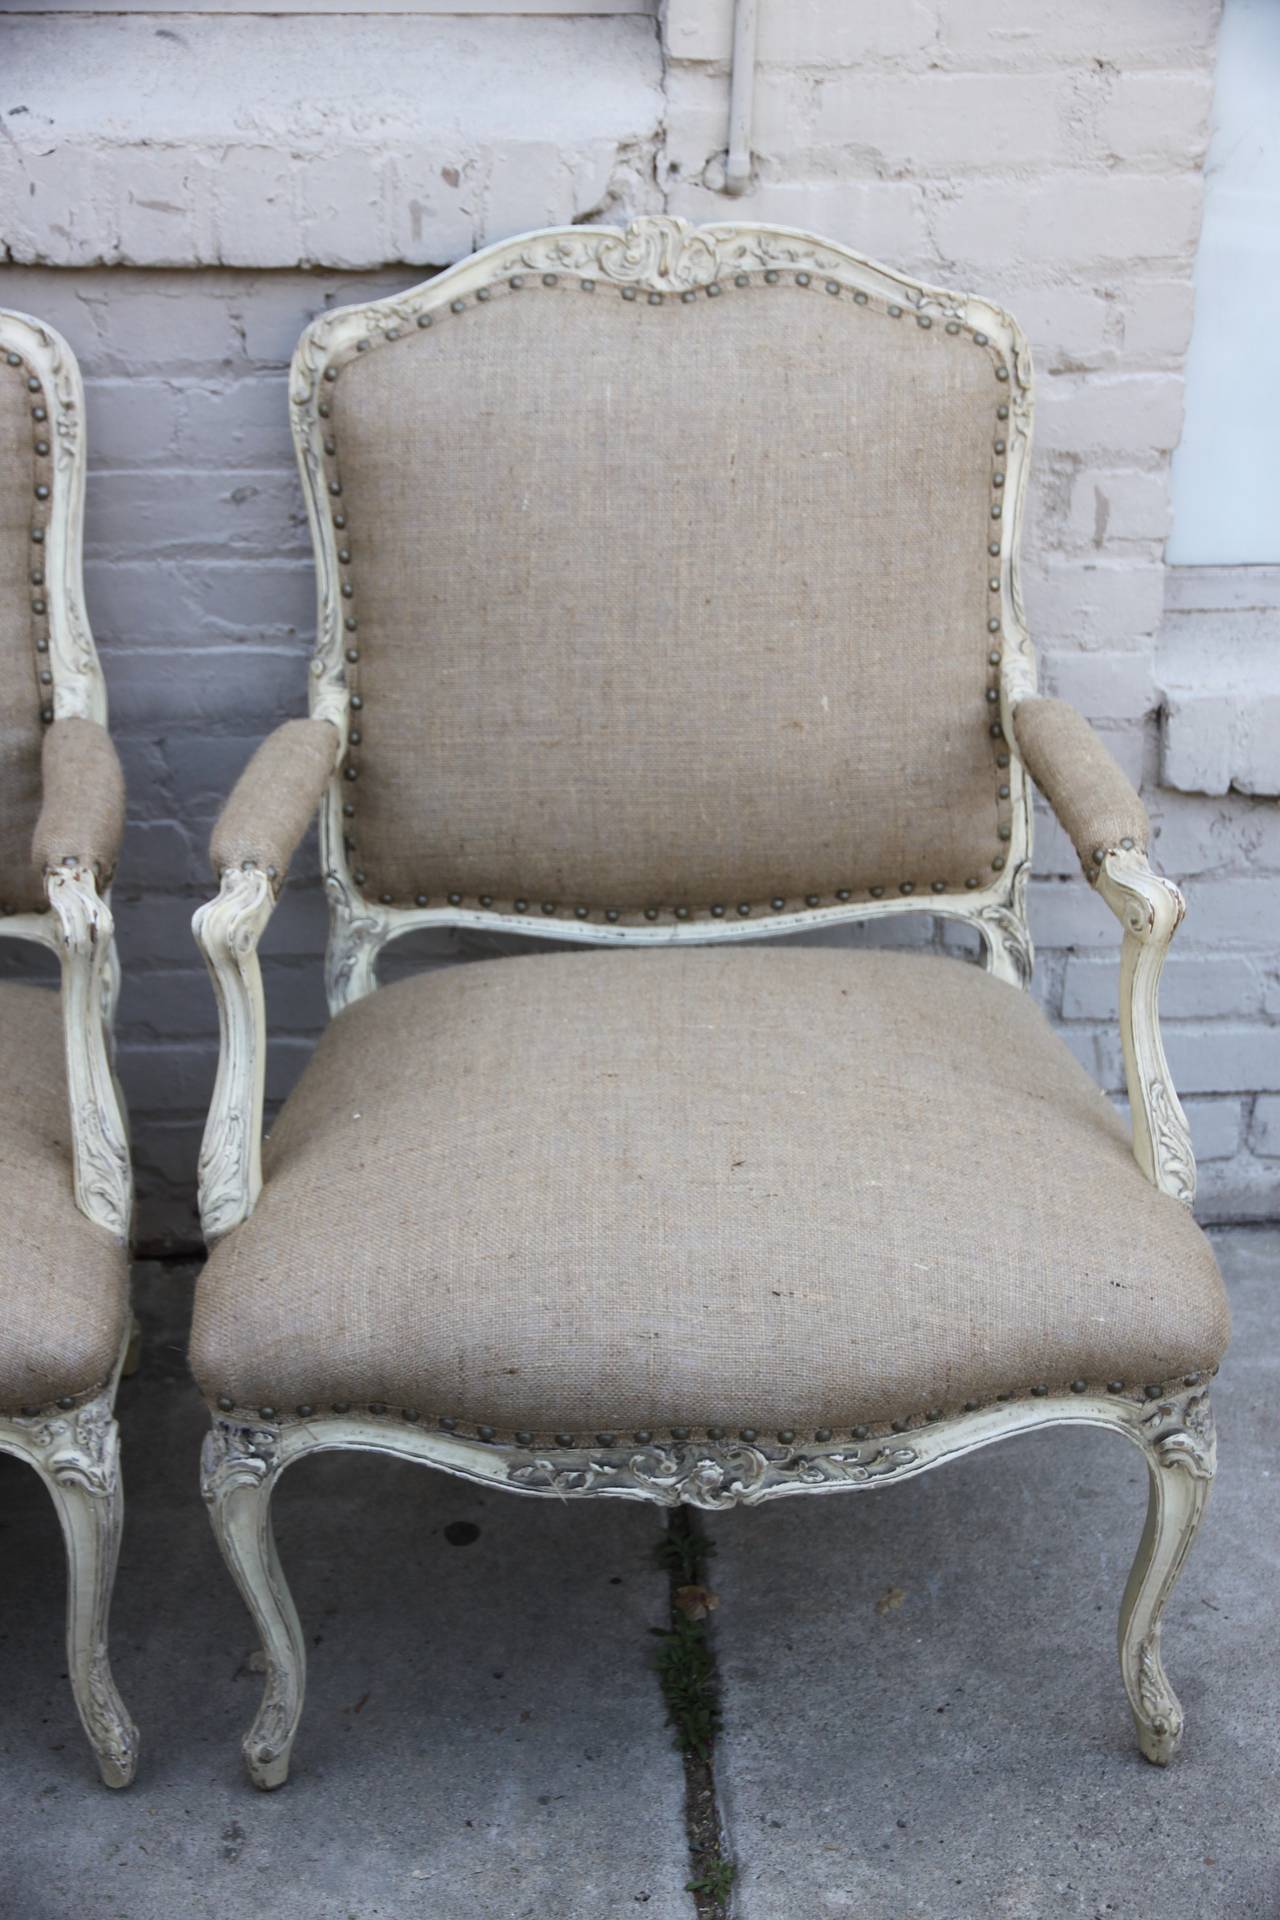 Pair of French cream colored Louis XV style painted fauteuils newly upholstered in burlap textile with nailhead trim detail. Back are upholstered in painted cane.